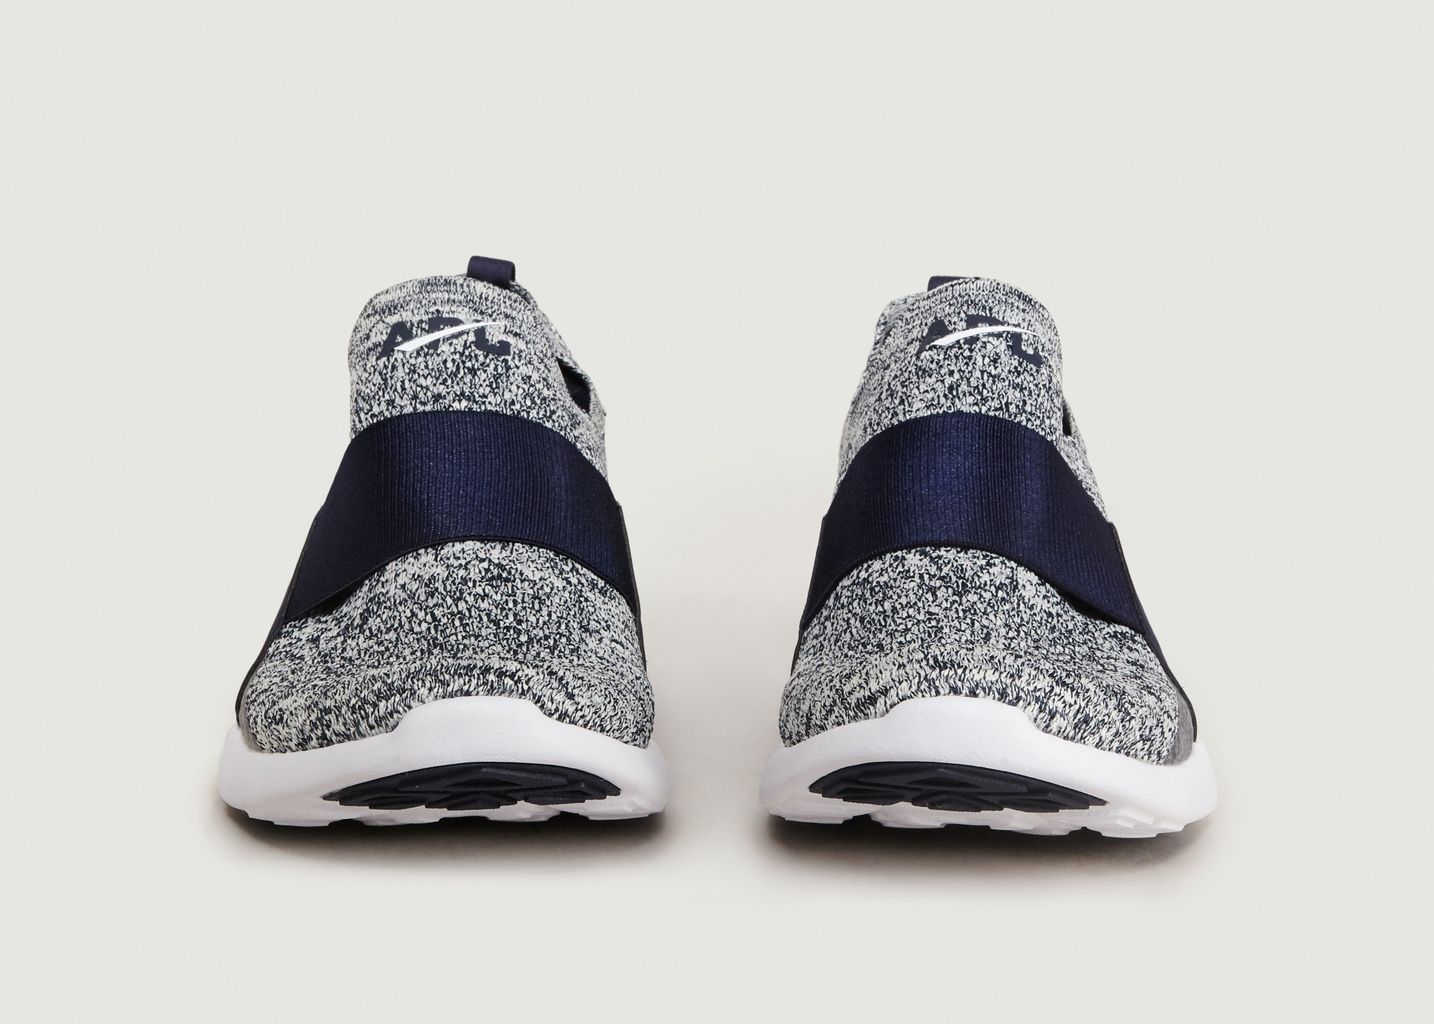 Sneakers Slip-On Tech Loom Bliss - Athletic Propulsion Labs